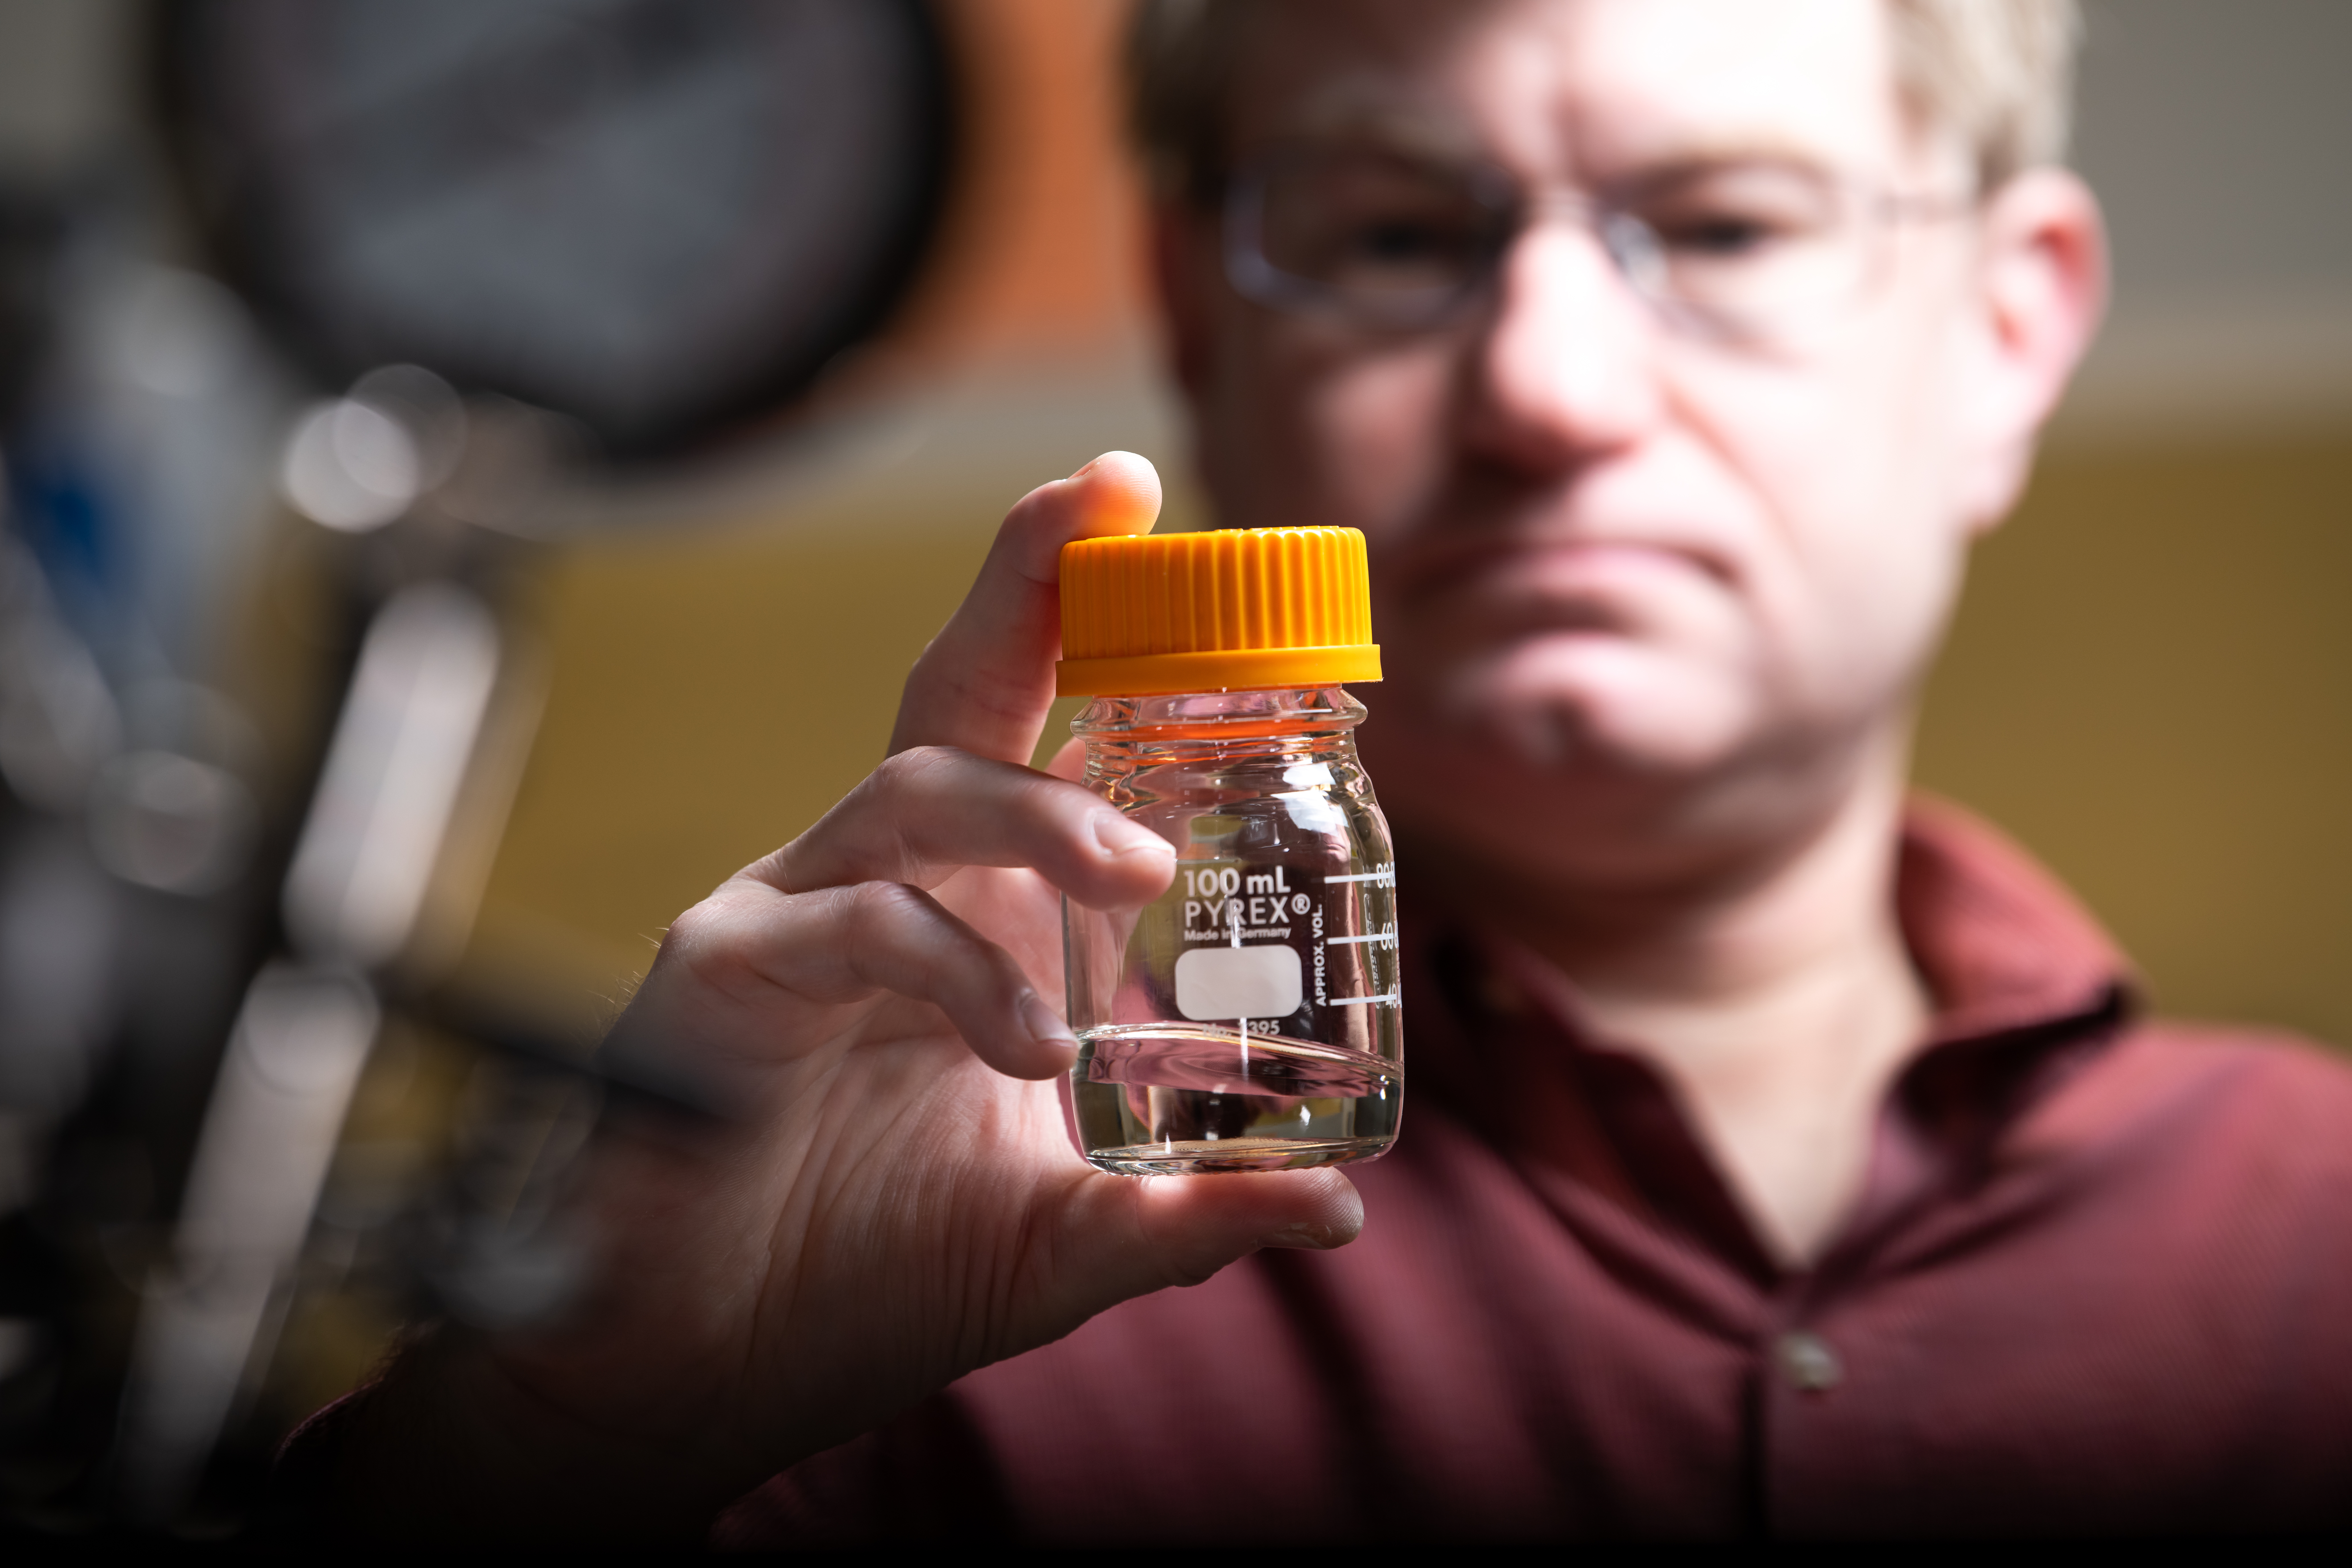 PNNL researcher Rob Dagel and his team have invented a new process that converts ethanol to butenes in a single step.